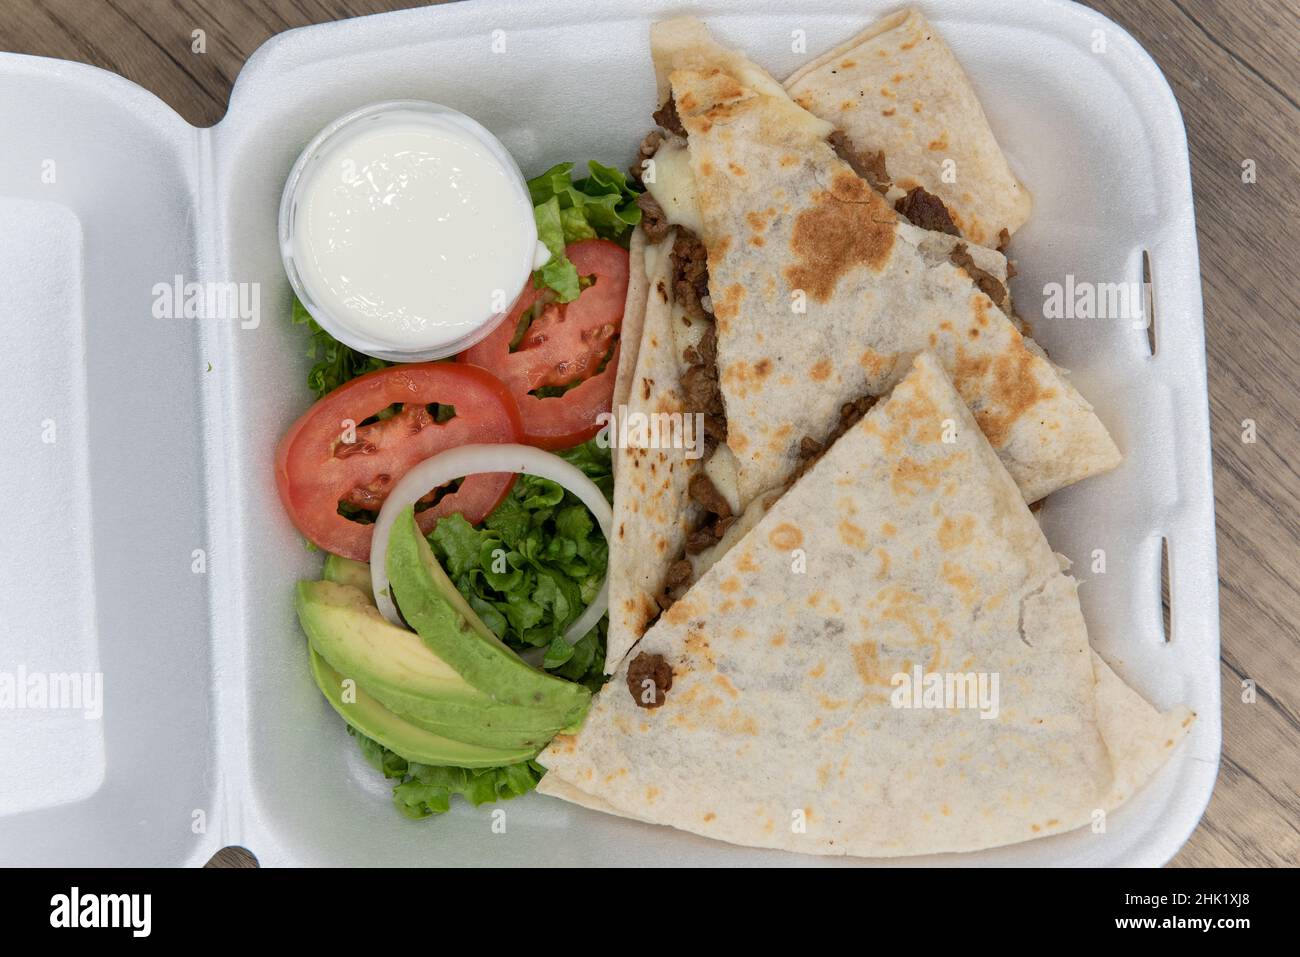 Overhead view of take out order of carne asada tortilla quesadillas cut into triangle pieces and served in styrofoam box. Stock Photo